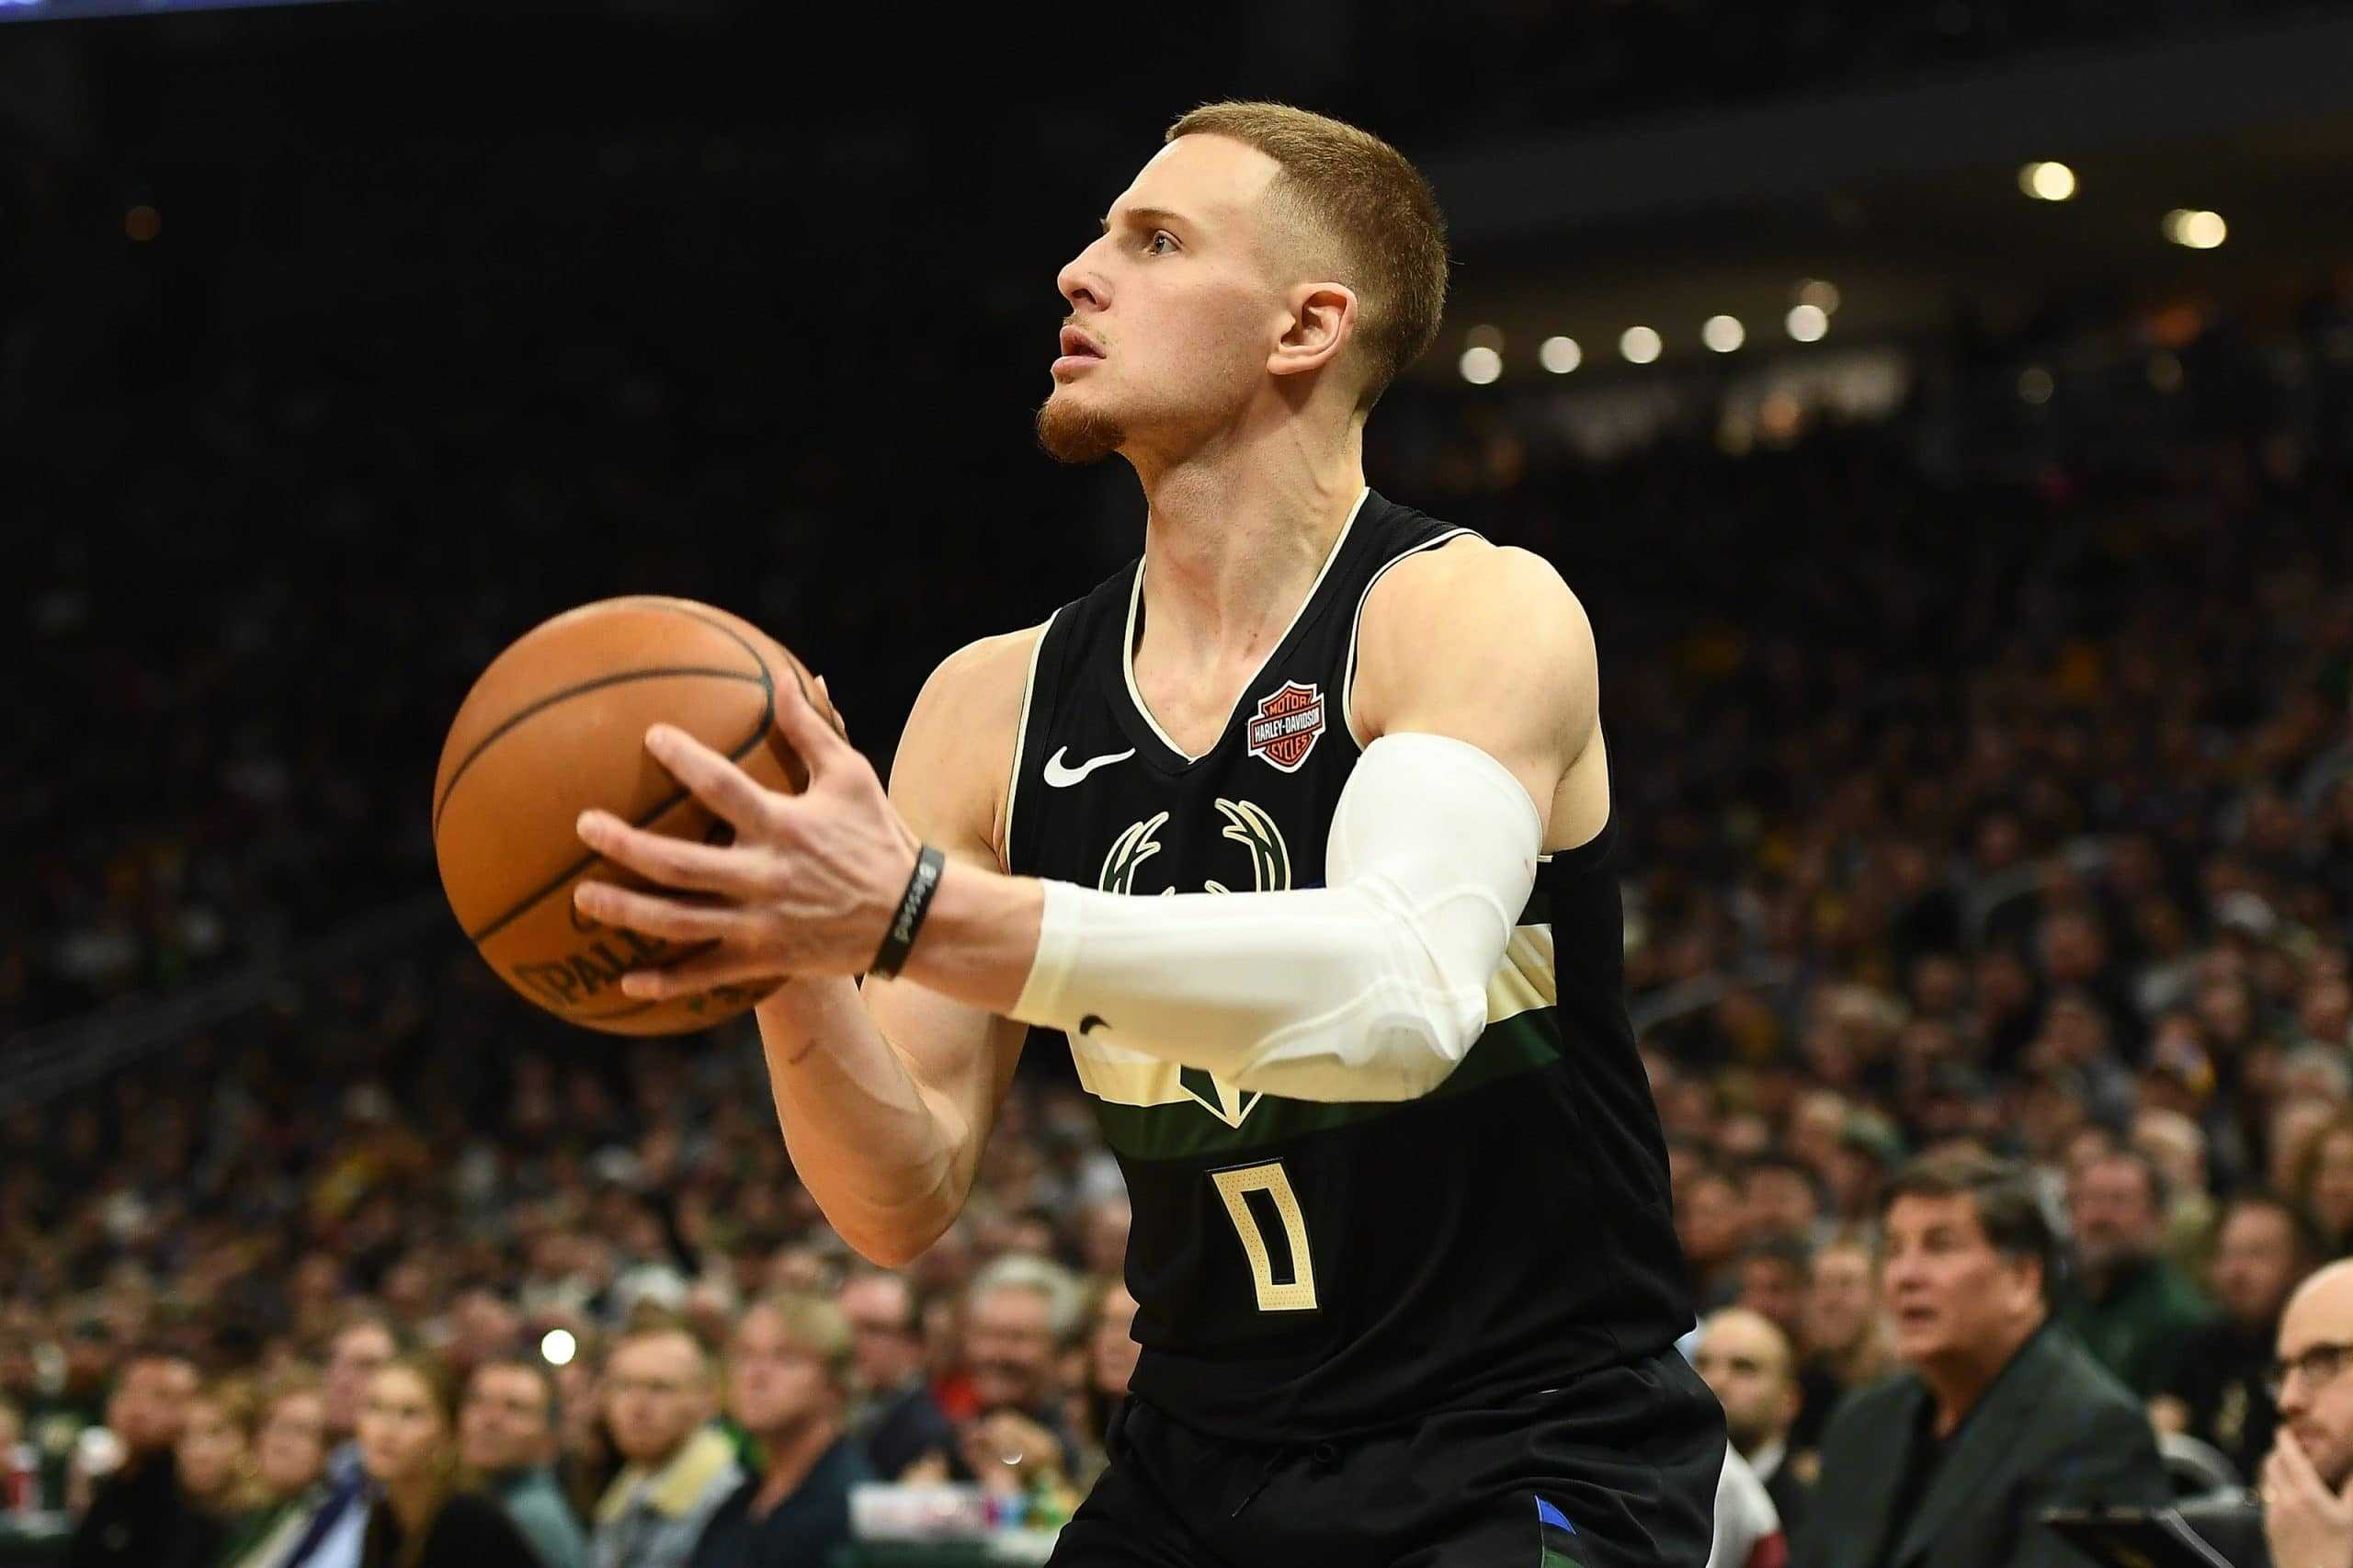 MILWAUKEE, WISCONSIN - DECEMBER 19: Donte DiVincenzo #0 of the Milwaukee Bucks takes a three point shot during a game against the Los Angeles Lakers at Fiserv Forum on December 19, 2019 in Milwaukee, Wisconsin. NOTE TO USER: User expressly acknowledges and agrees that, by downloading and or using this photograph, User is consenting to the terms and conditions of the Getty Images License Agreement. (Photo by Stacy Revere/Getty Images) (NBA News)